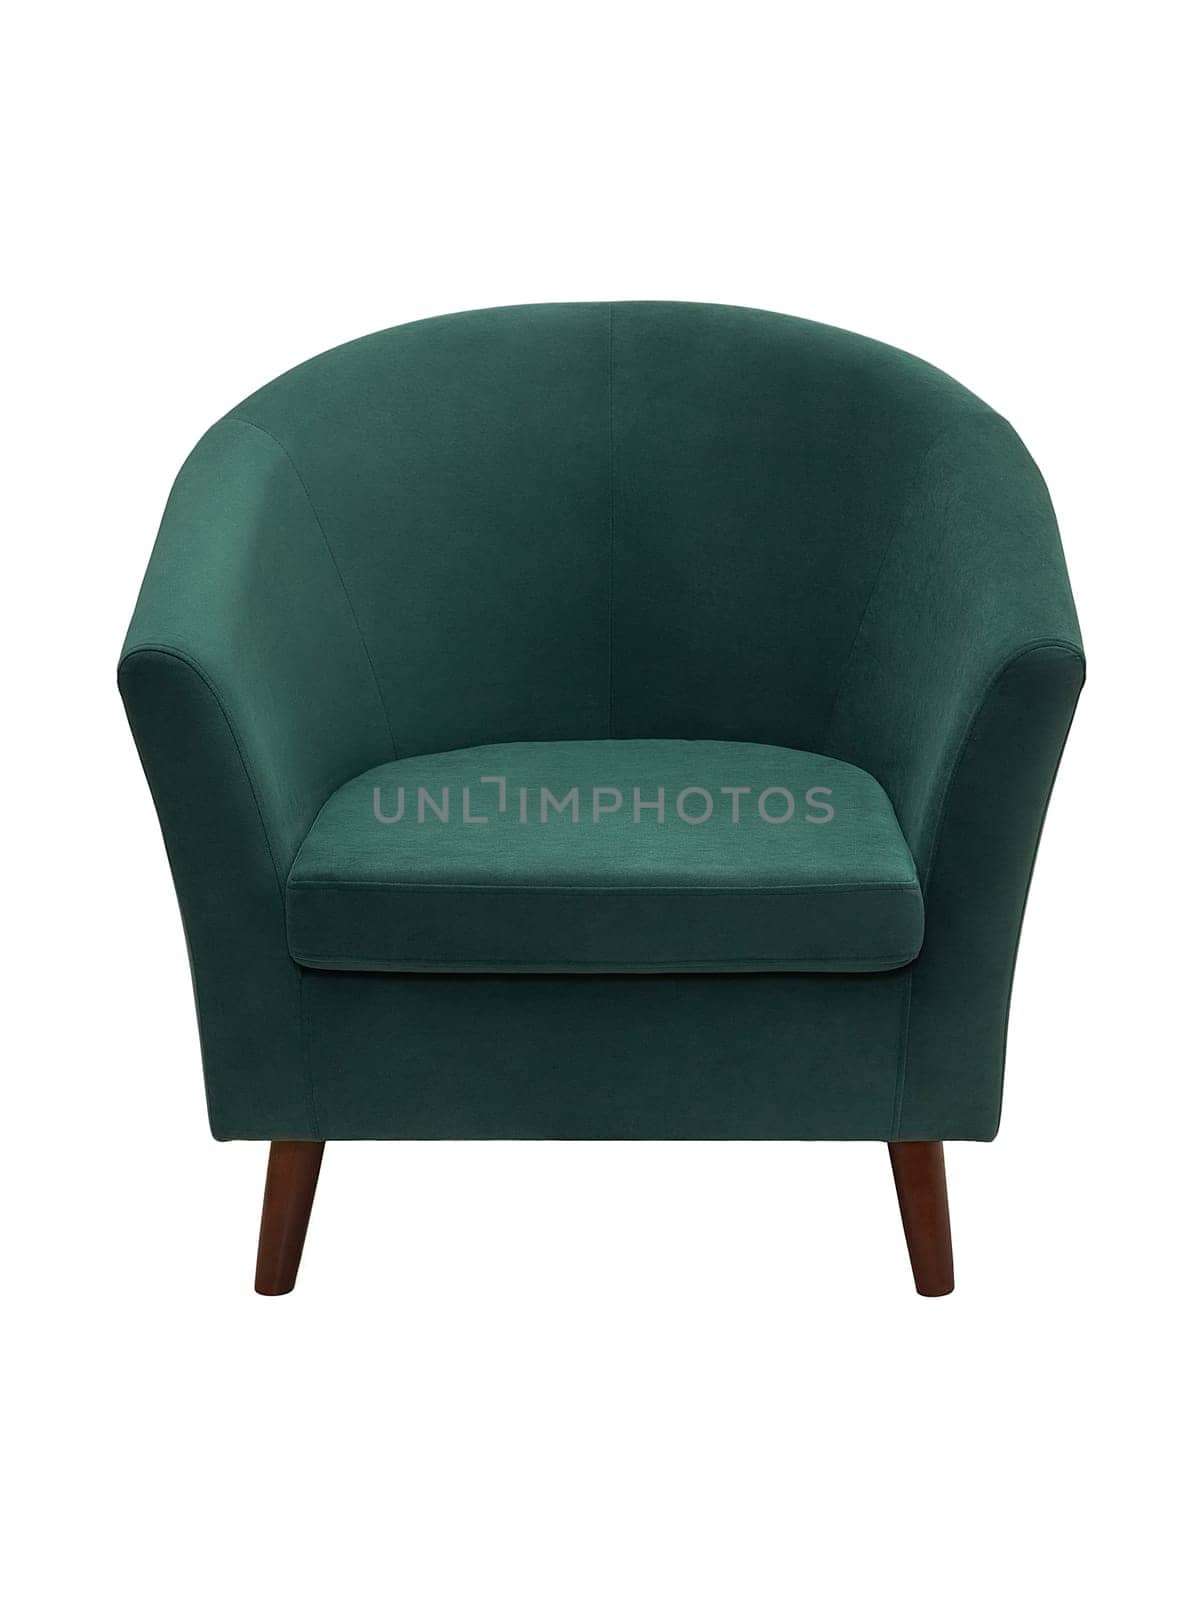 modern green fabric armchair with wooden legs isolated on white background, front view.